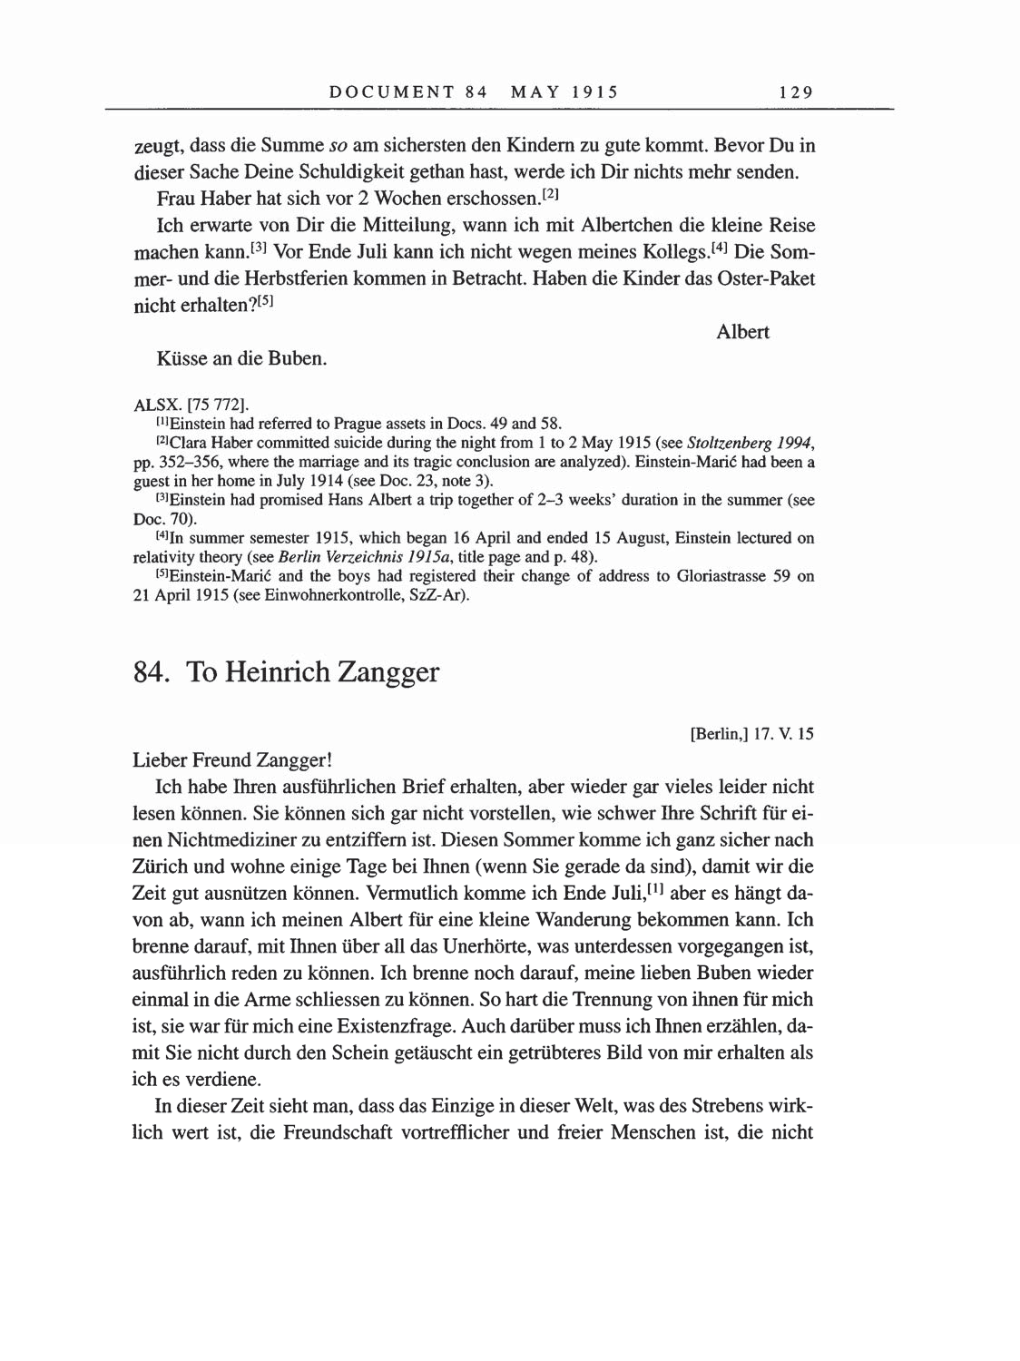 Volume 8, Part A: The Berlin Years: Correspondence 1914-1917 page 129